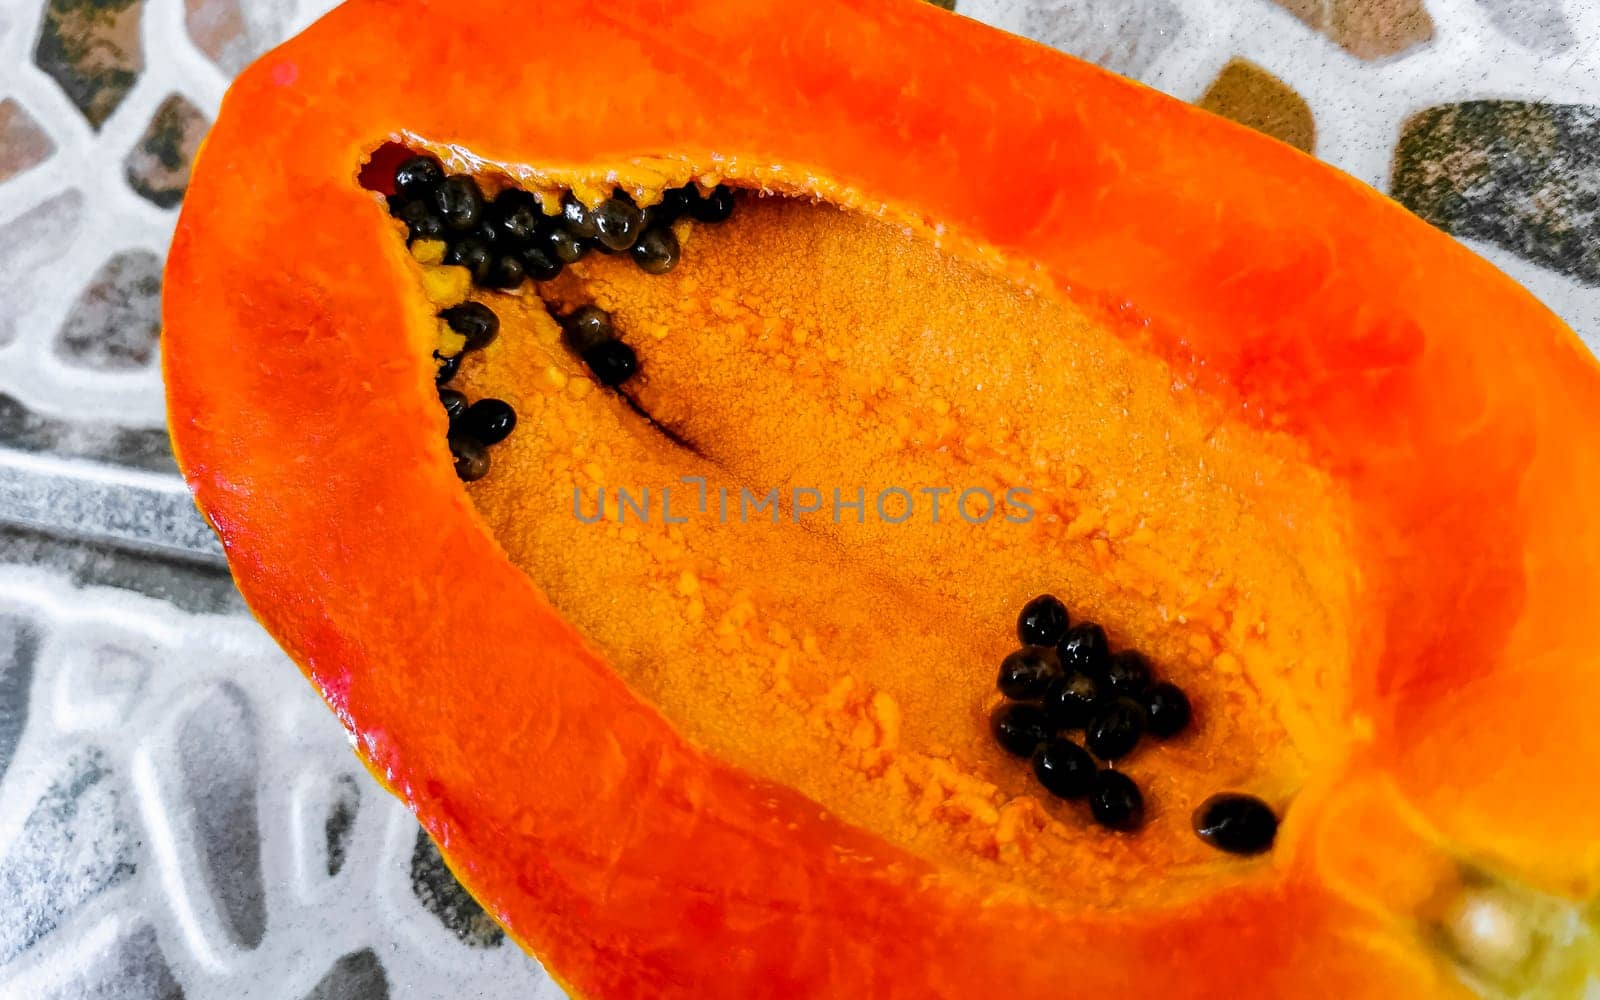 Half papaya in hand with background in Mexico. by Arkadij